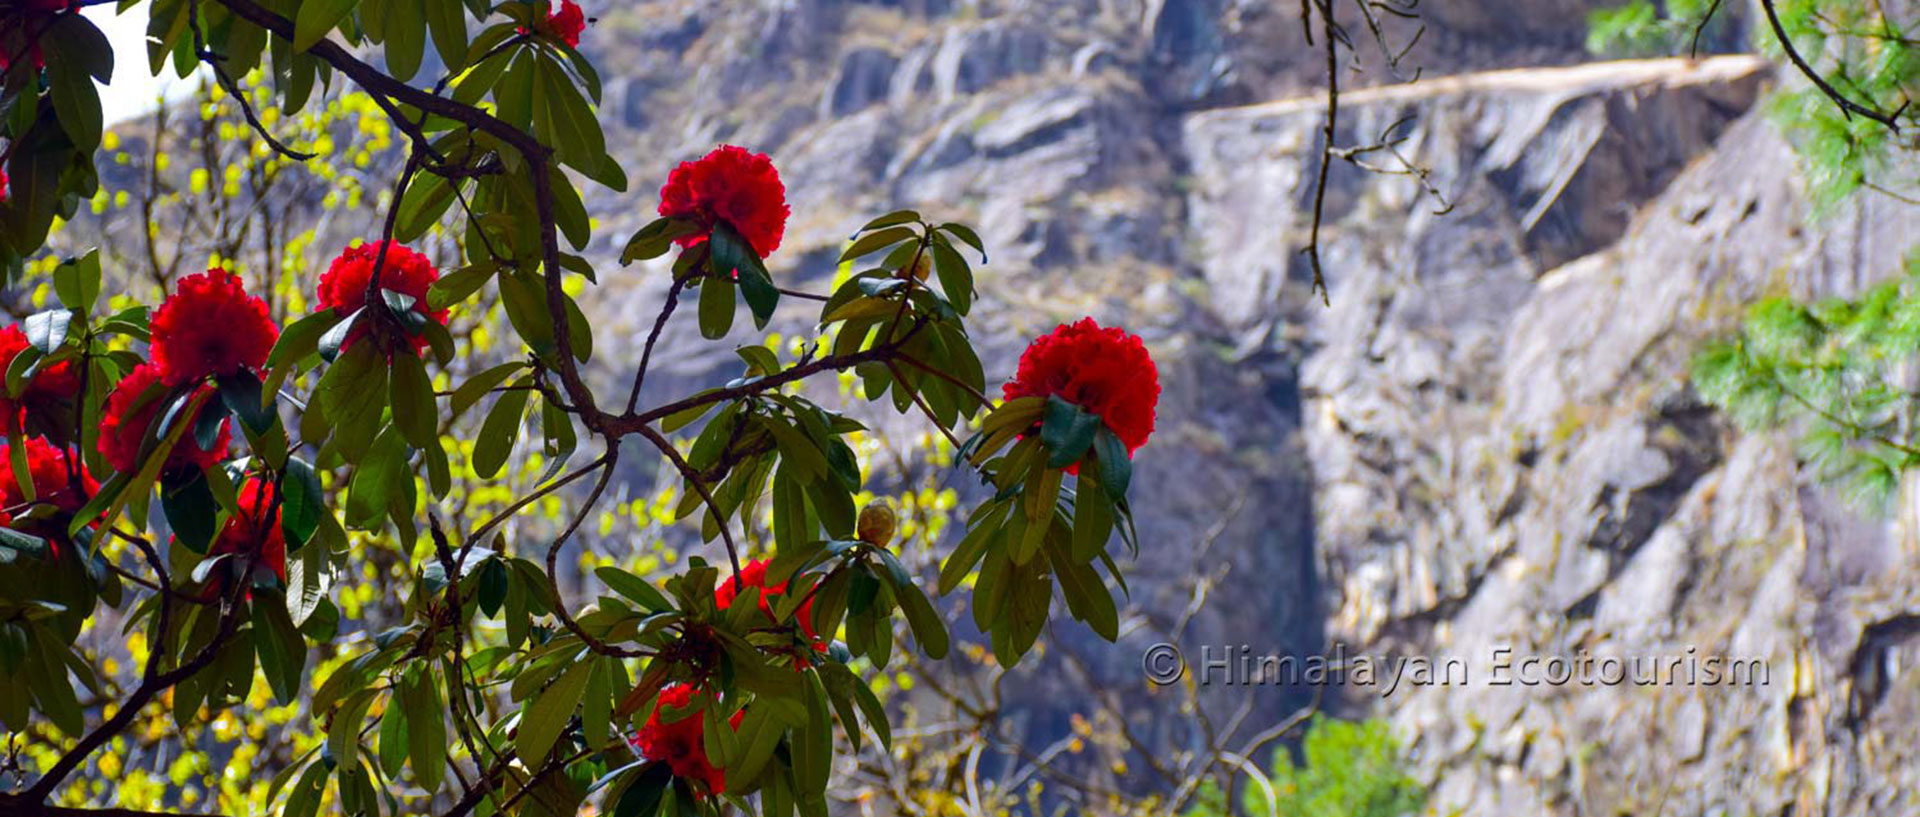 Rhododendron flowers in the Great Himalayan National Park